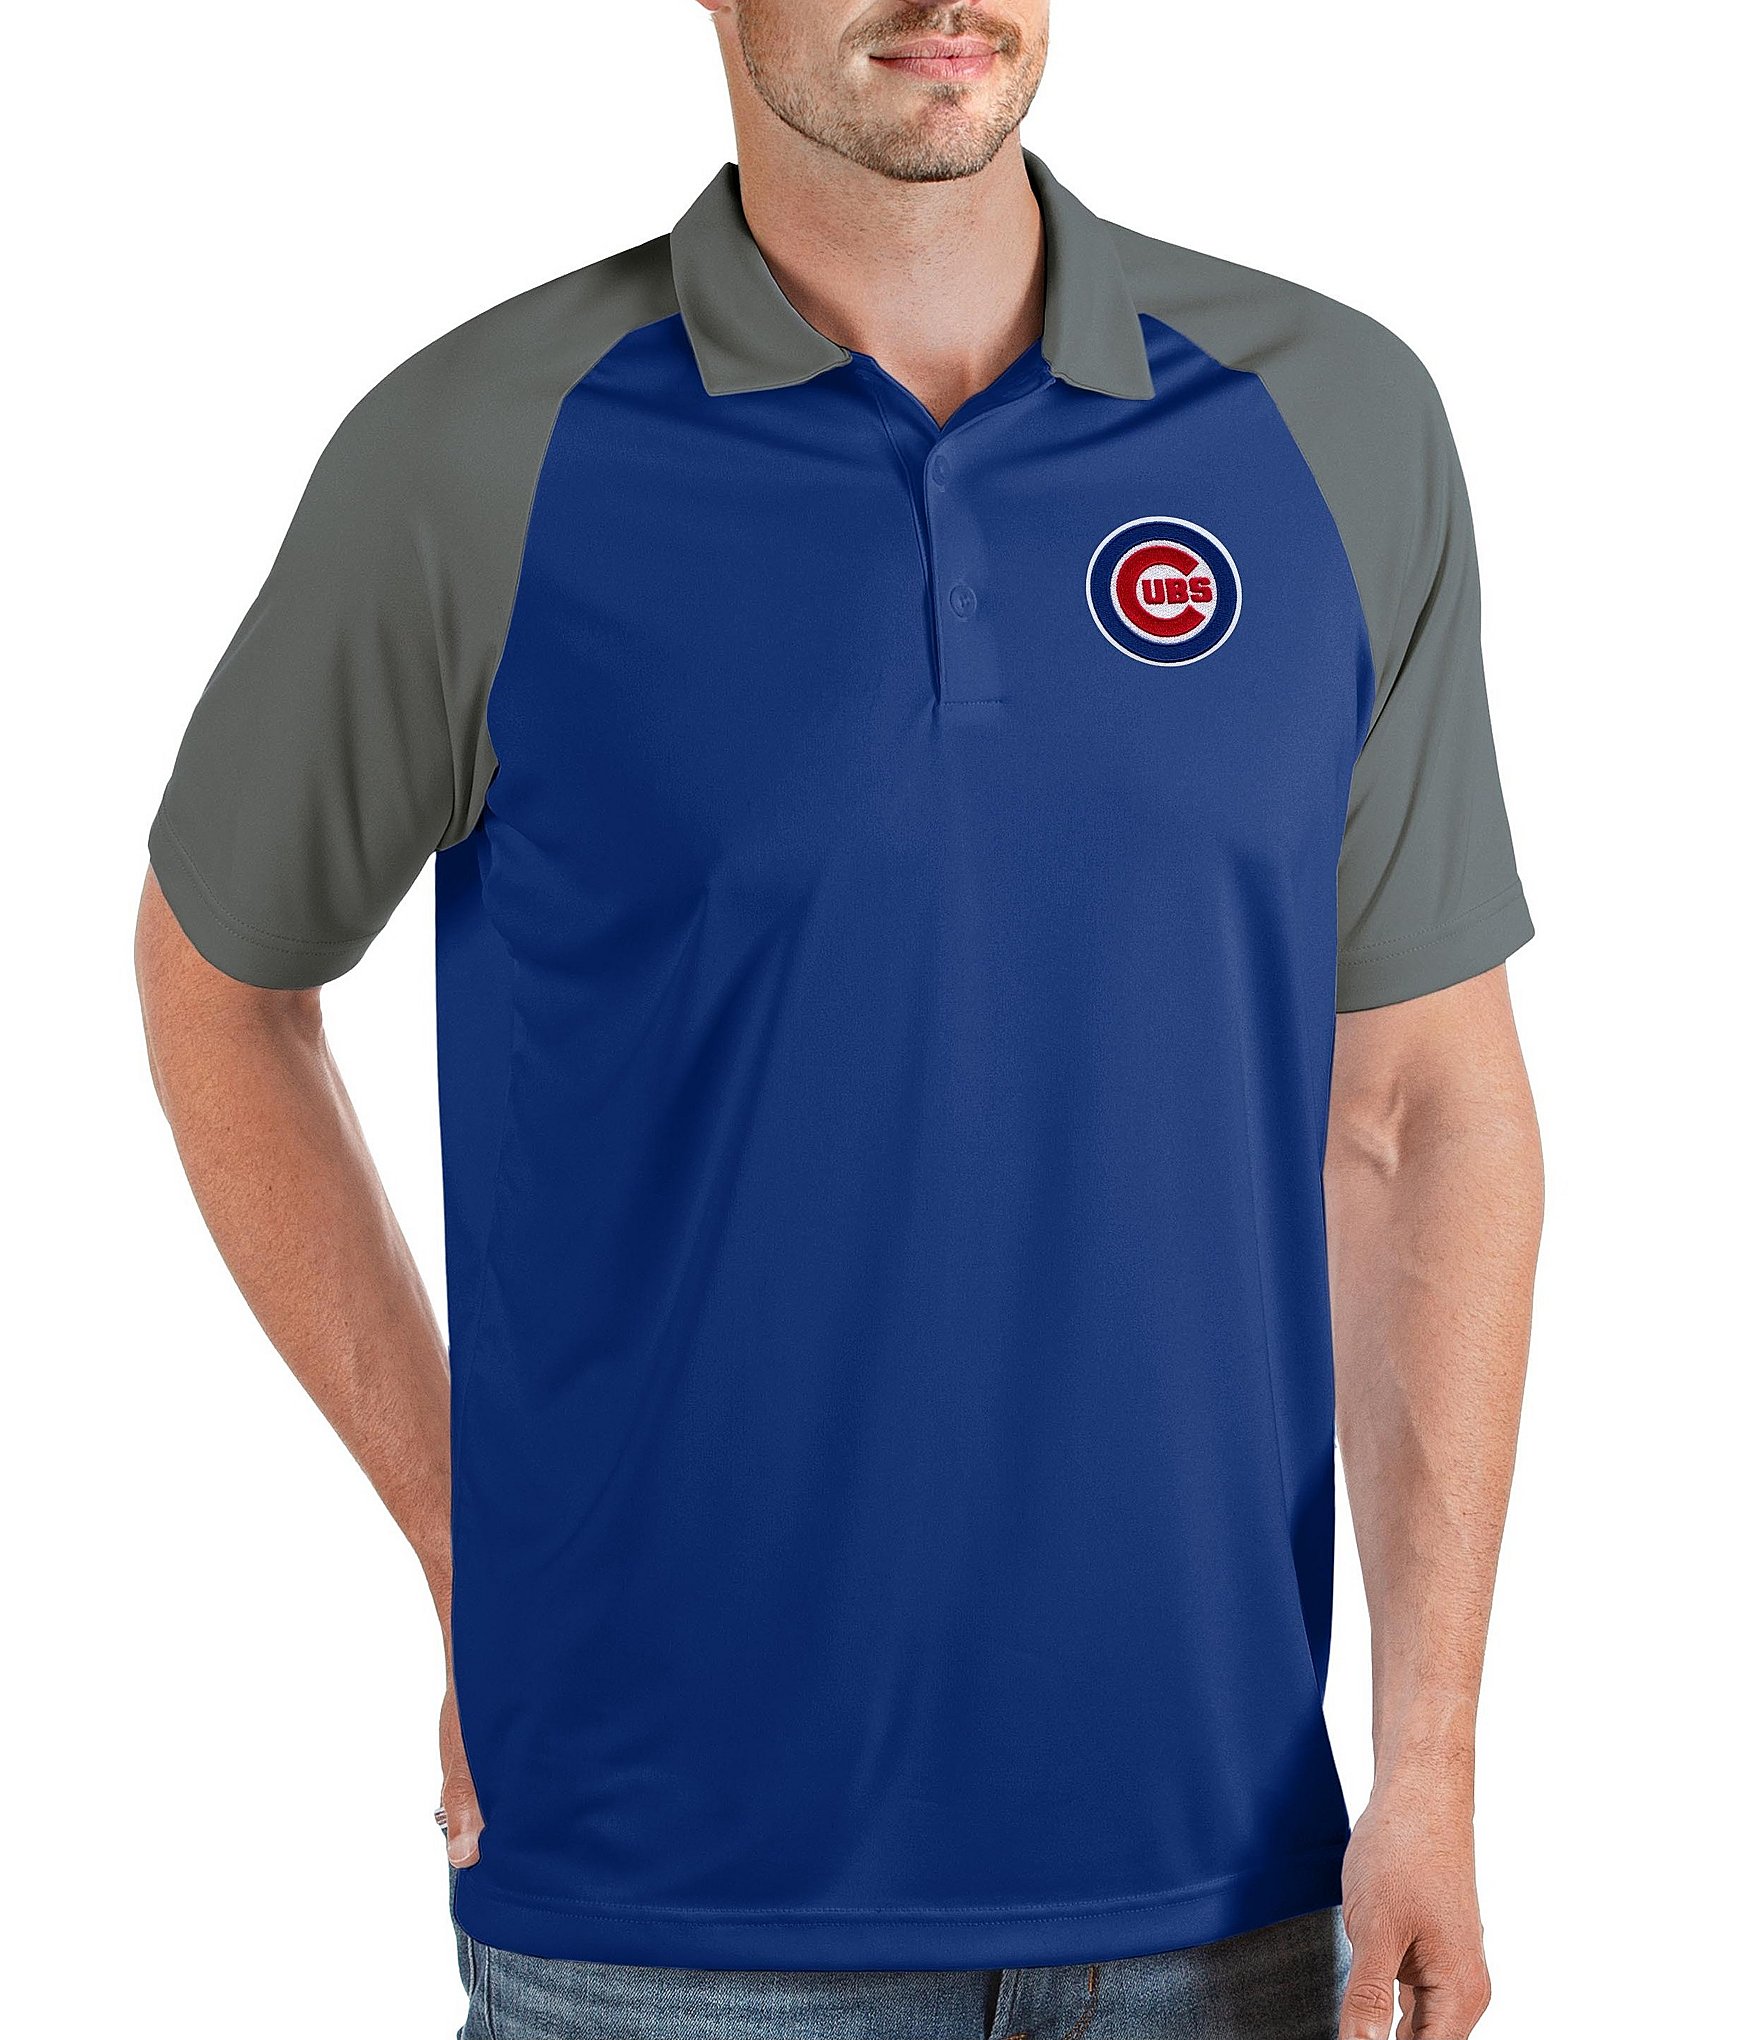 Women's Antigua White Chicago Cubs Motivated Polo Size: Large